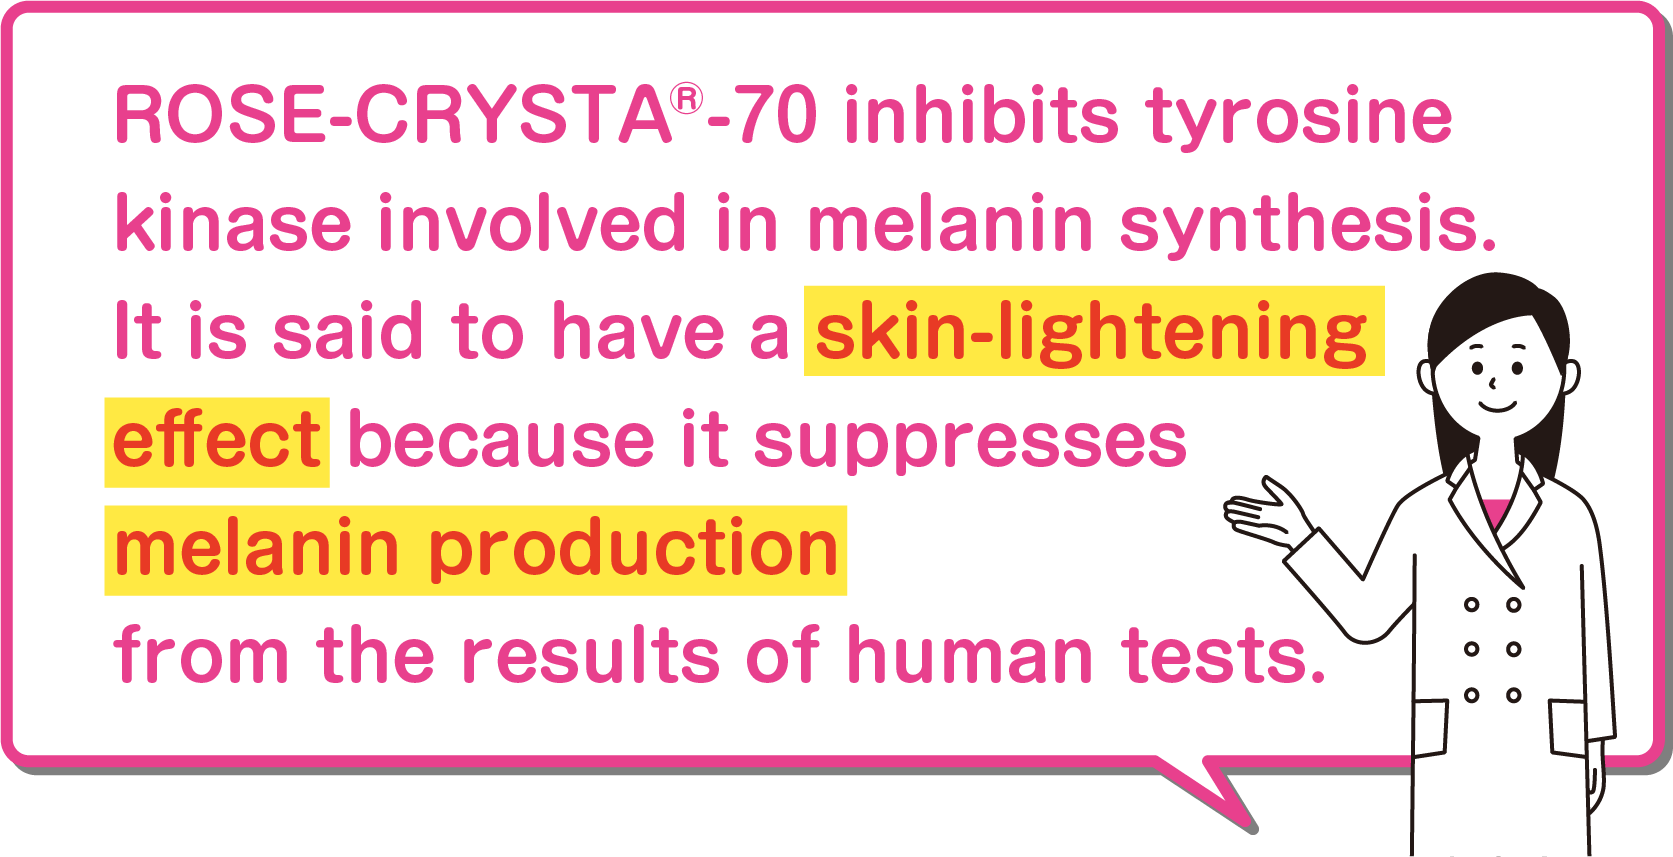 ROSE-CRYSTA®-70 inhibits tyrosine kinase involved in melanin synthesis. It is said to have a skin-lightening effect because it suppresses melanin production from the results of human tests.